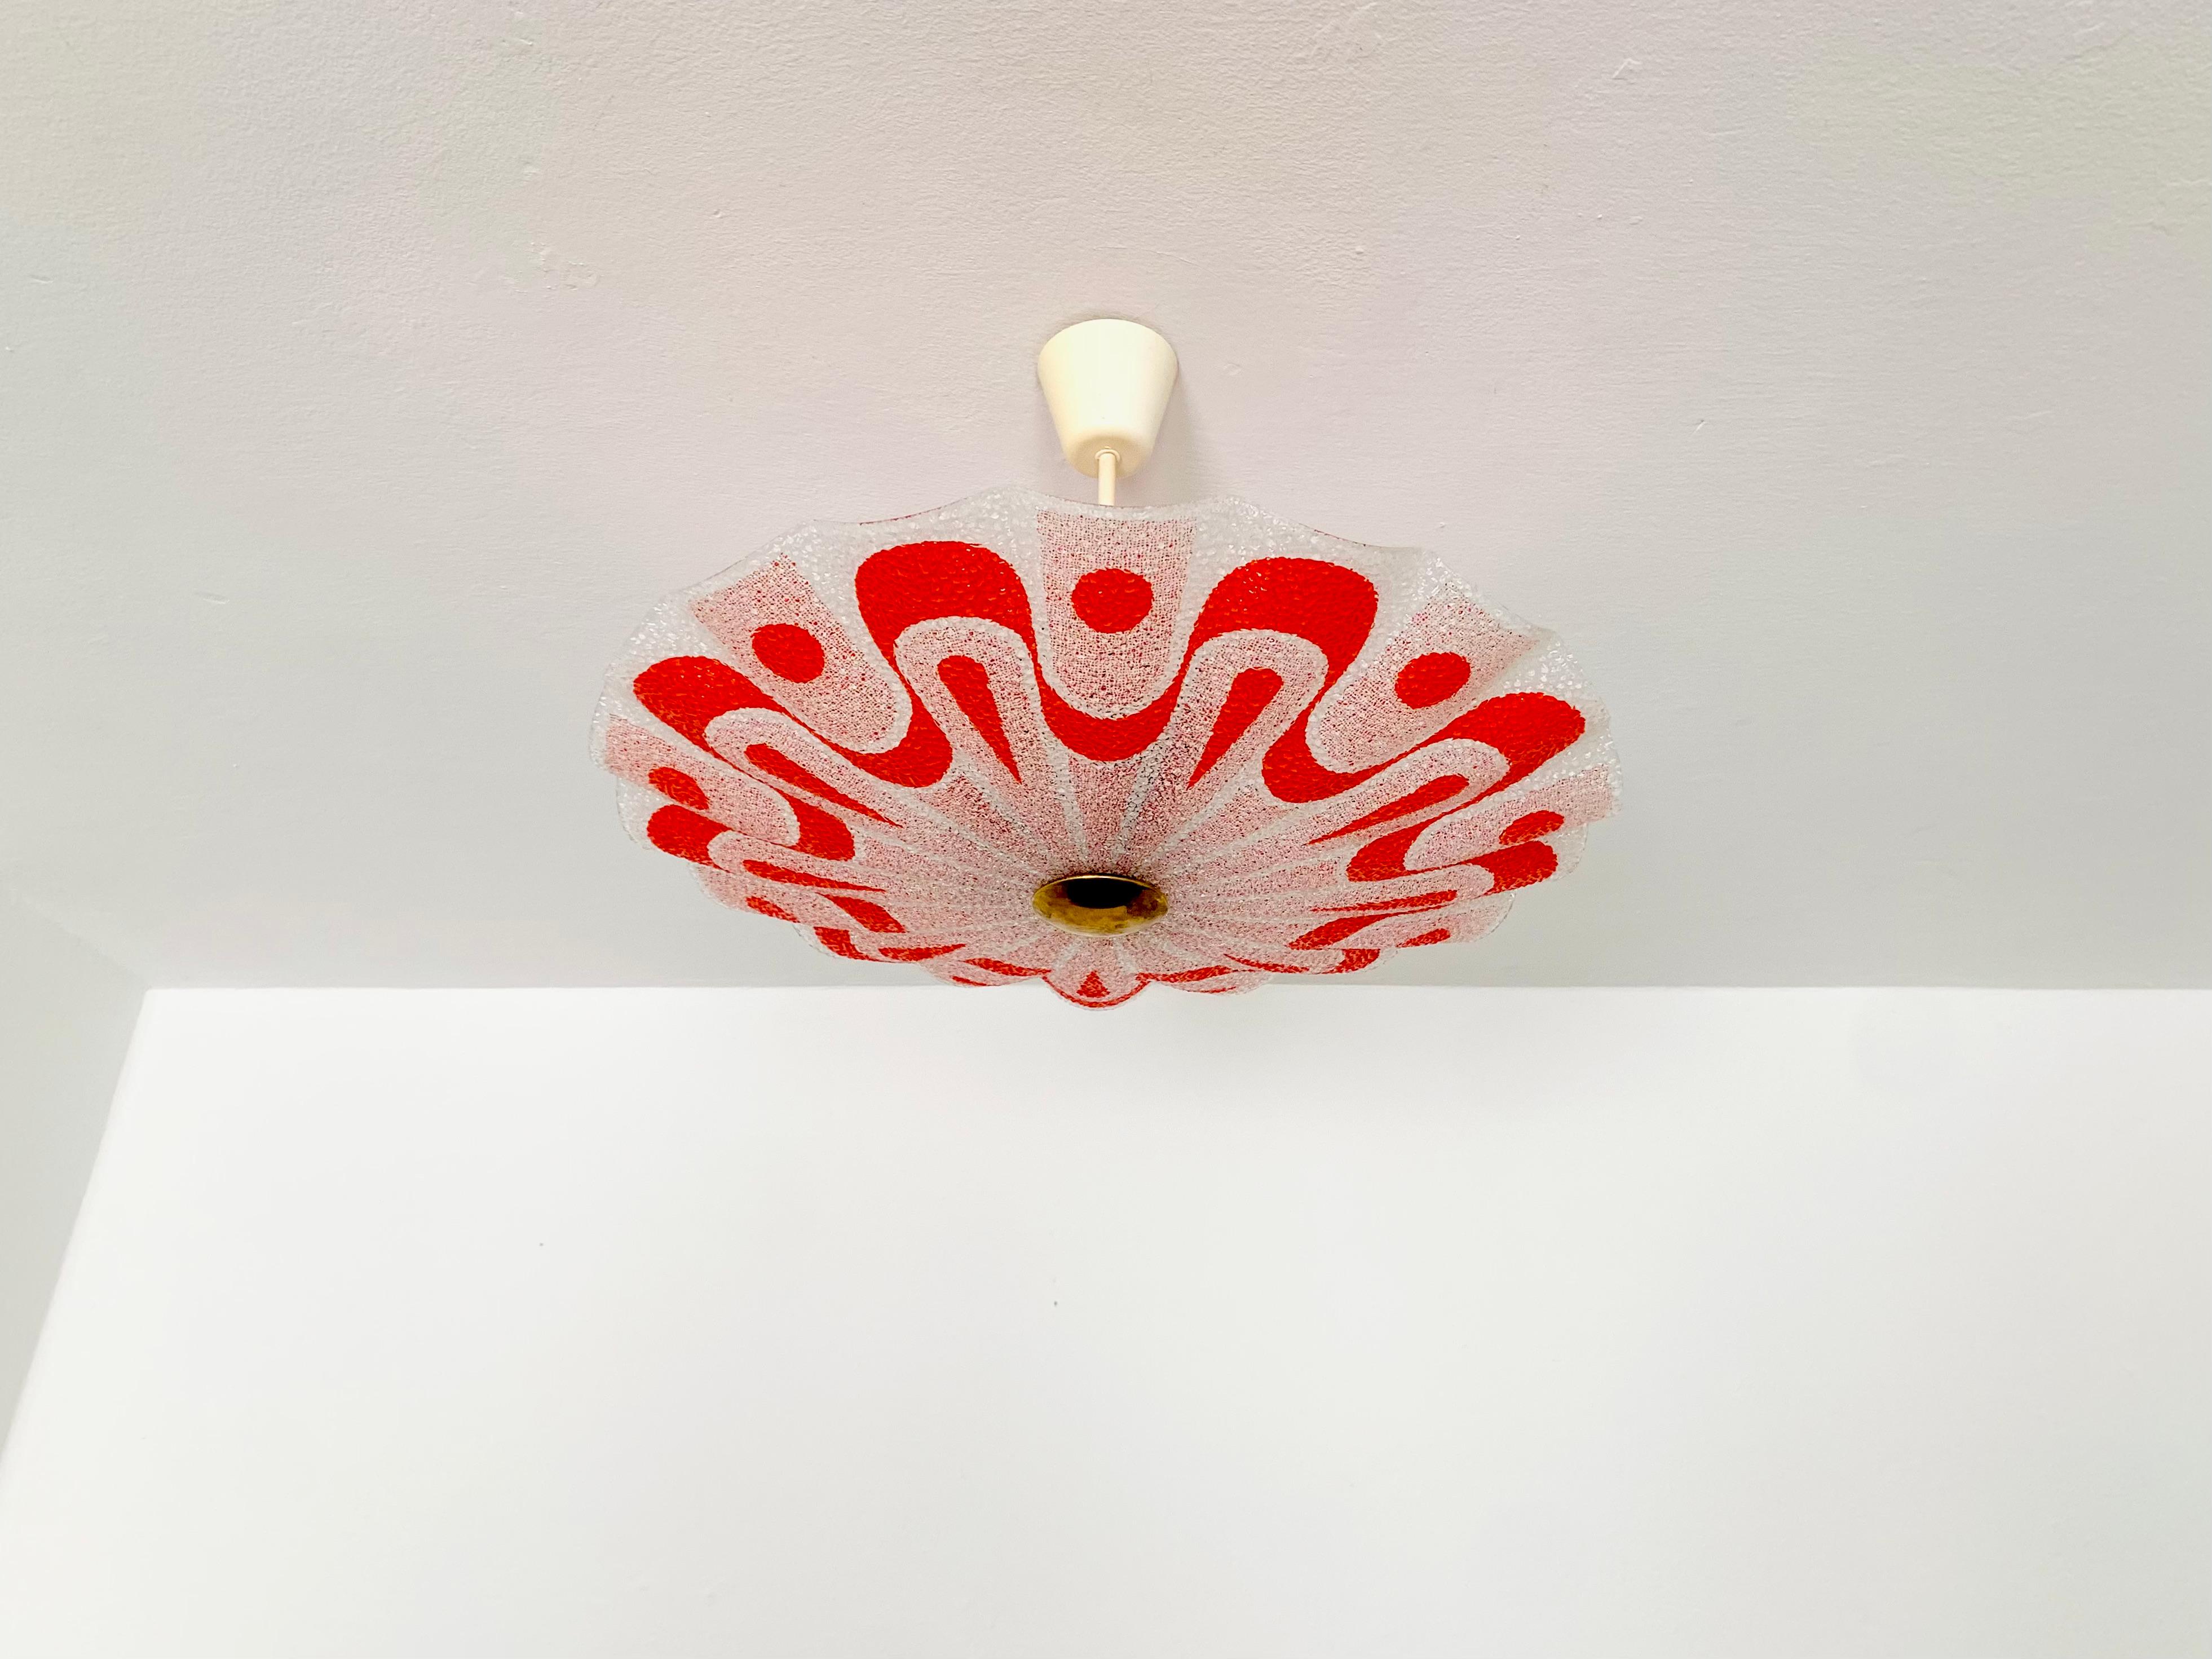 Wonderful ceiling lamp from the 1950s.
The glass has a special structure.
The design and the materials used create a great glittering light.
A breathtaking lamp and a real asset for every home.

Manufacturer: VEB

Condition:

Very good vintage